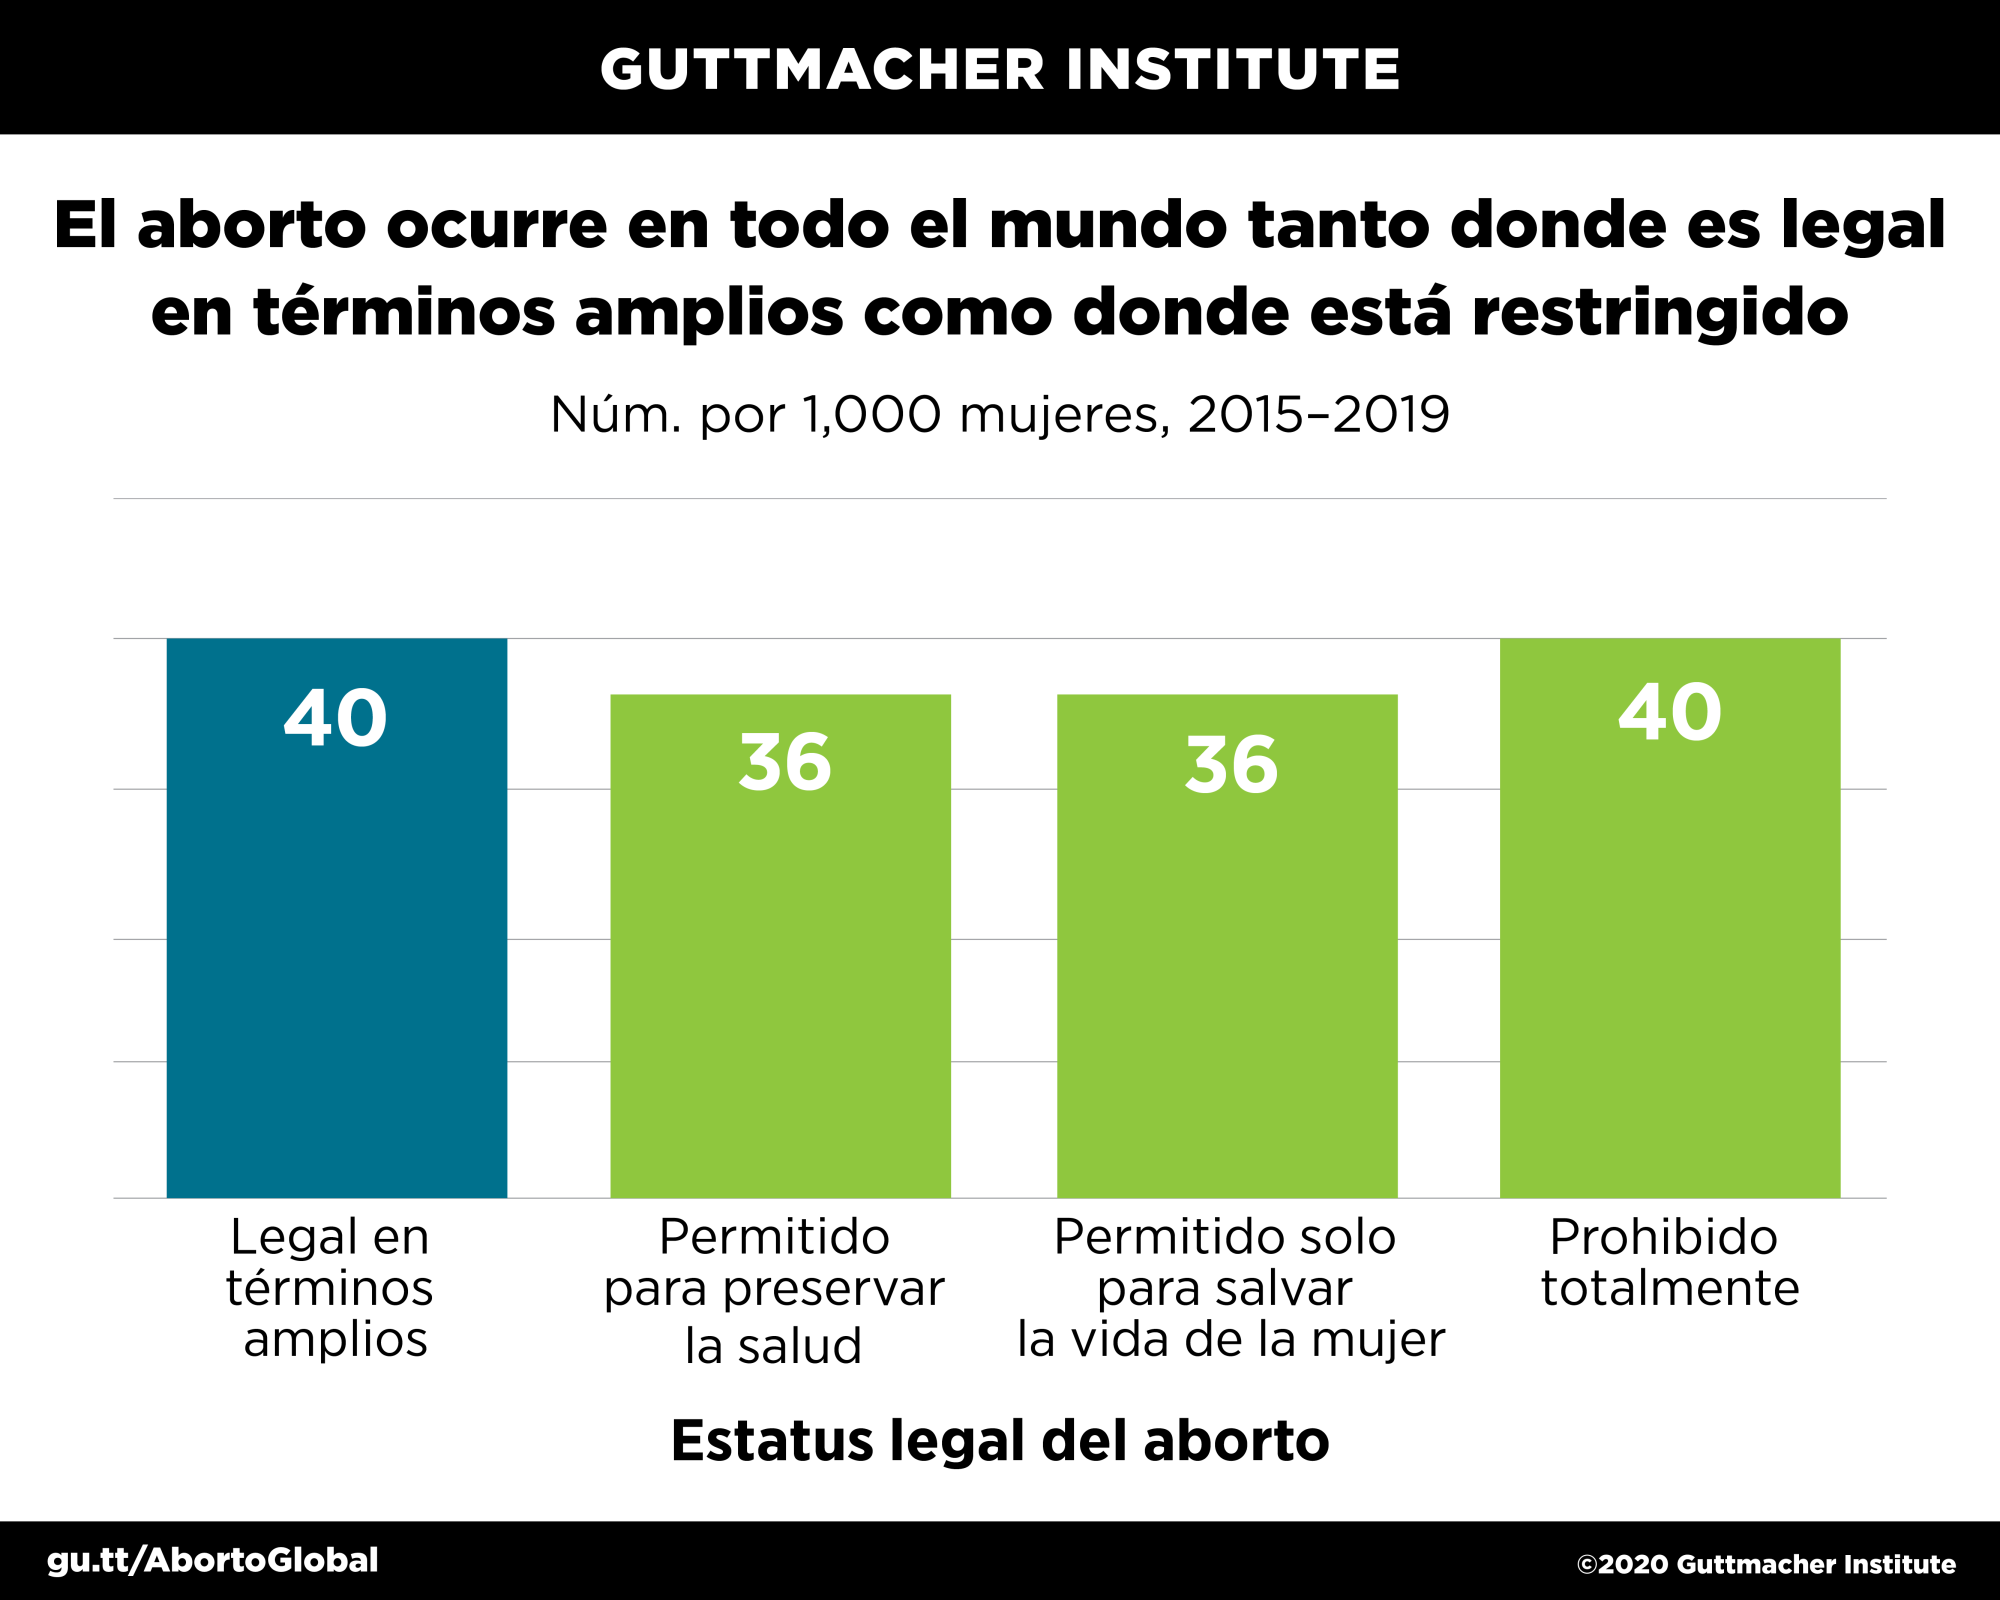 Abortion occurs worldwide where it is broadly legal and where it is restricted 